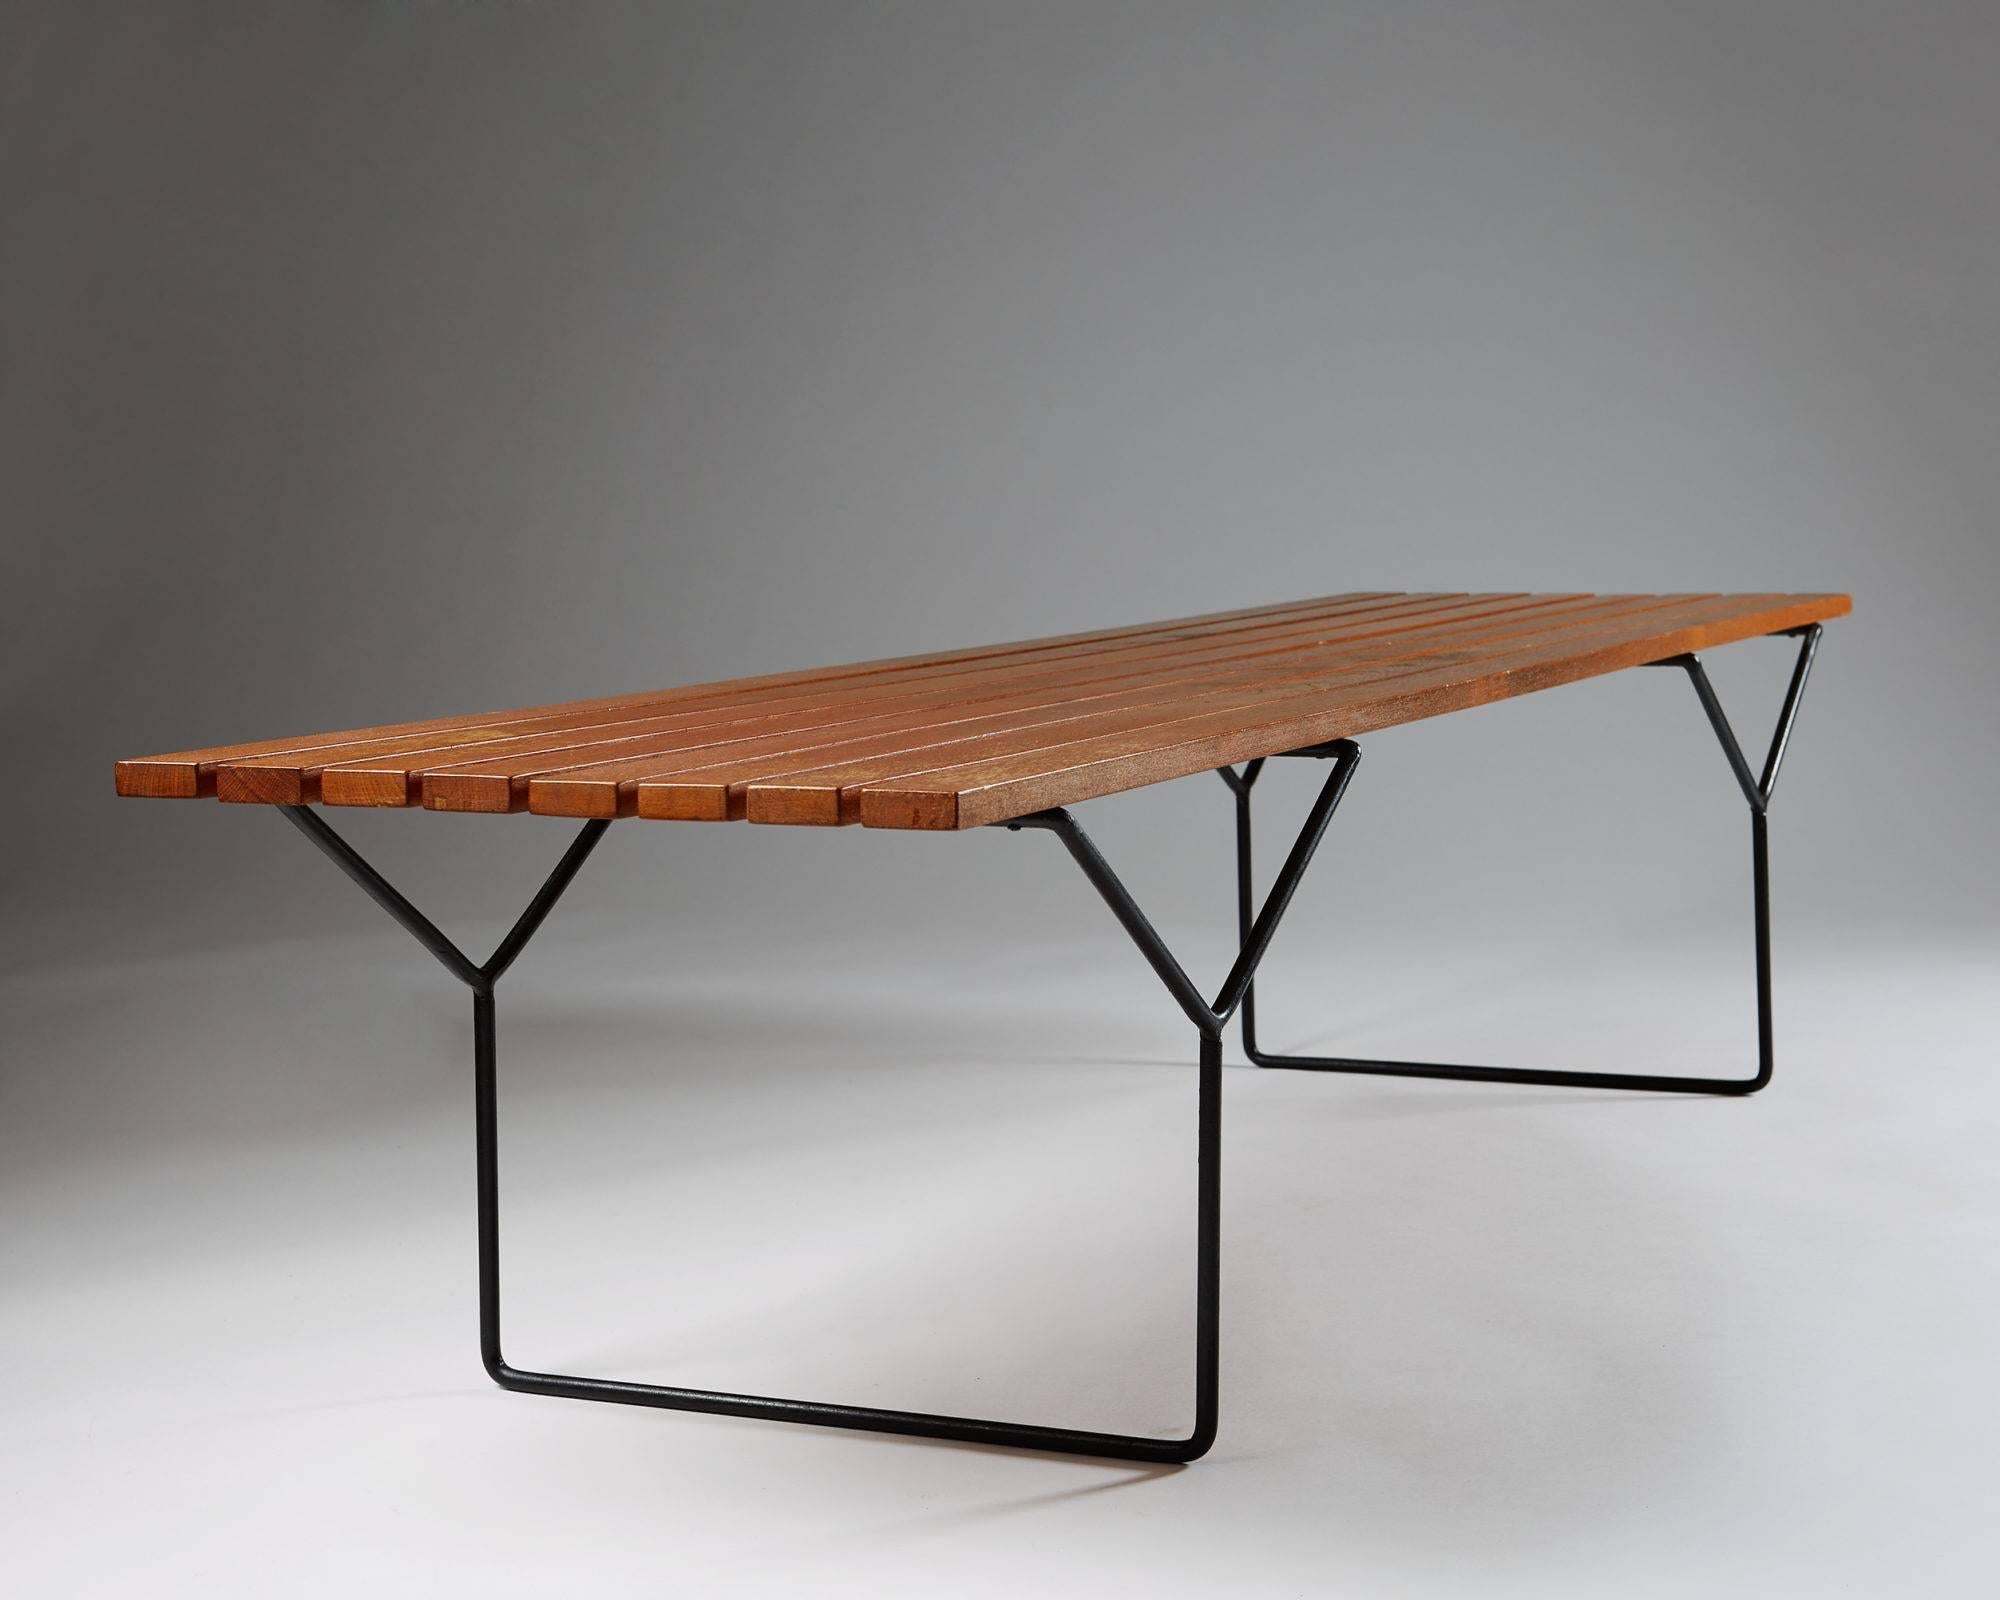 Bench designed by Harry Bertoia for Knoll International, USA, 1952.
Lacquered steel and teak.

H: 40 cm/ 15 3/4''
L: 183 cm/ 6'
D: 47 cm/ 18 1/2''
  